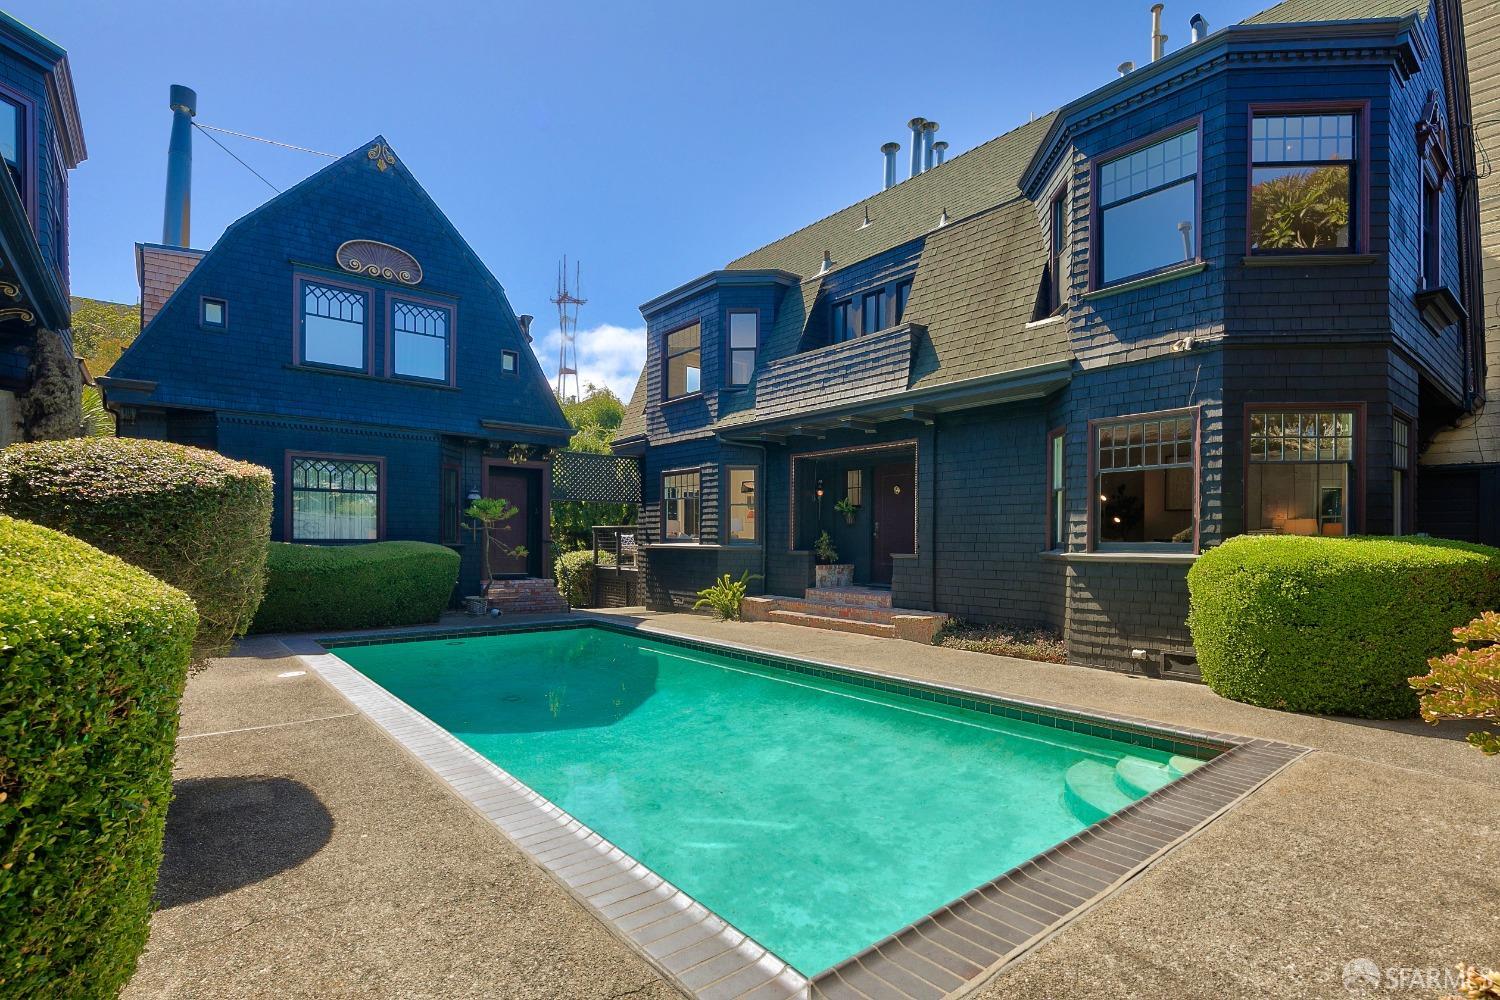 Nestled in the heart of Cole Valley, this Maxwell Bugbee designed shingle-style pool home offers the opportunity to own a piece of San Francisco architectural history. 61 Carl is a perfect blend of classic architecture and modern comfort, hidden away behind a large privacy fence. With three bedrooms, two baths, and in a prime location, this property is an ideal choice for those seeking the best of city living. The home's design allows for large windows that flood the space with natural light, while the hardwood floors and fireplace add warmth and character. Main floor includes a large living room and dining room, and a family room that overlooks the pool and backyard. Chef's kitchen features marble countertops, stainless appliances and large built-in eating area. Bedroom floor features oversized primary bedroom, new bathroom and two additional light-filled large bedrooms. Step out from the kitchen to your private deck and down to the large south facing backyard with mature trees and plants. Stroll to nearby shops, cafes, and restaurants on Cole Street or take a short walk to Golden Gate Park for outdoor adventures. Operates like a single family home - technically a condominium with pool house on lot. Seller will consider Seller financing or rate buy-down.